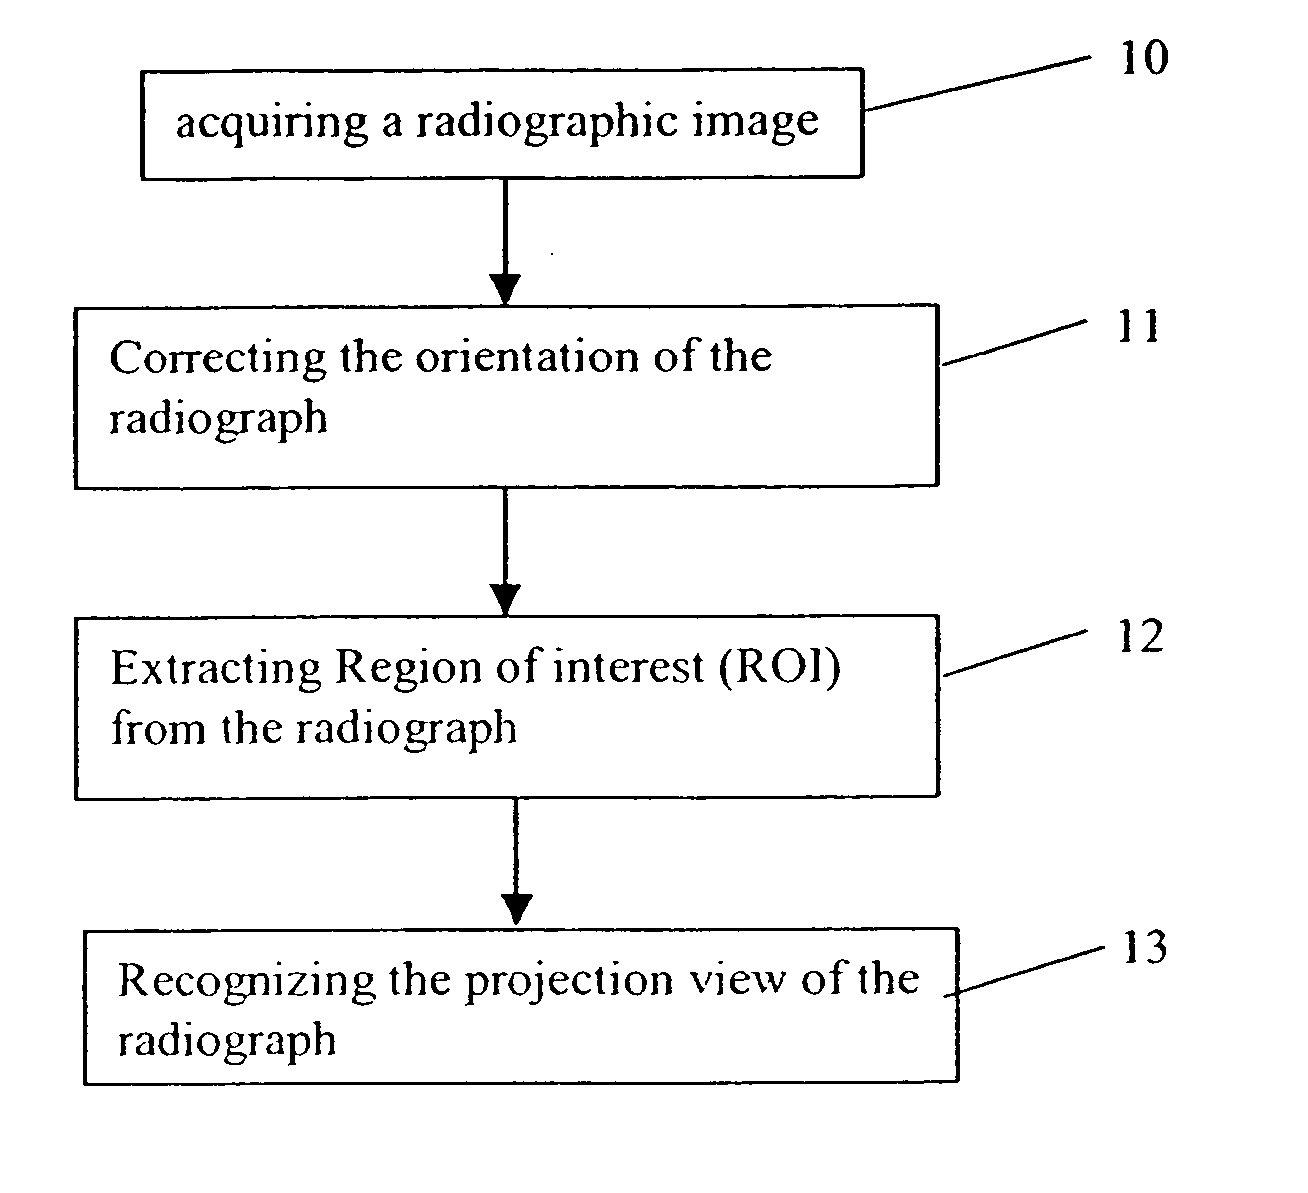 Method for recognizing projection views of radiographs